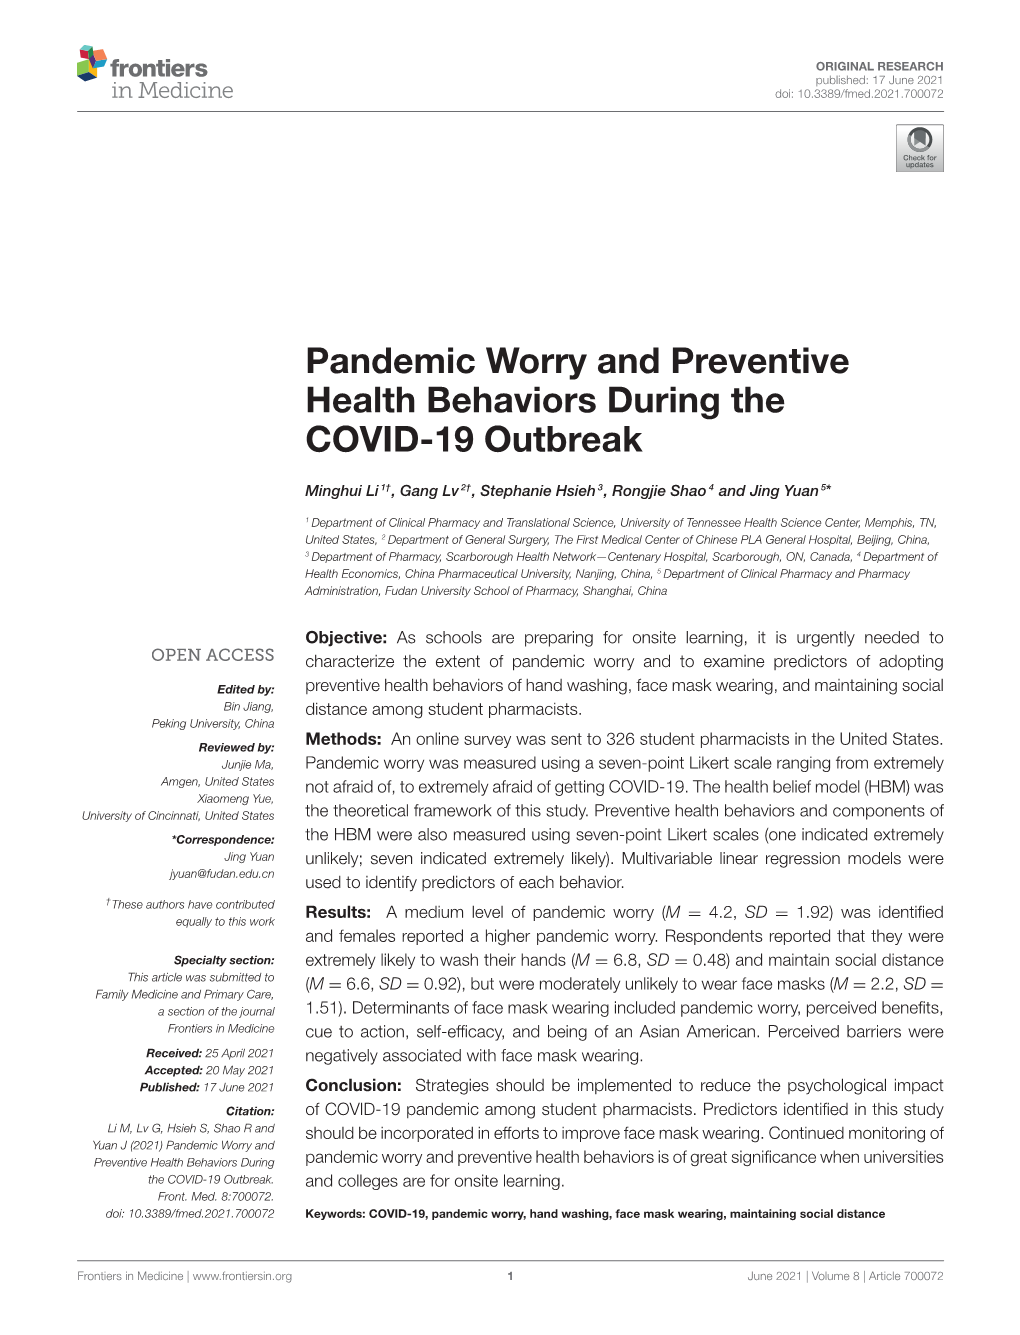 Pandemic Worry and Preventive Health Behaviors During the COVID-19 Outbreak